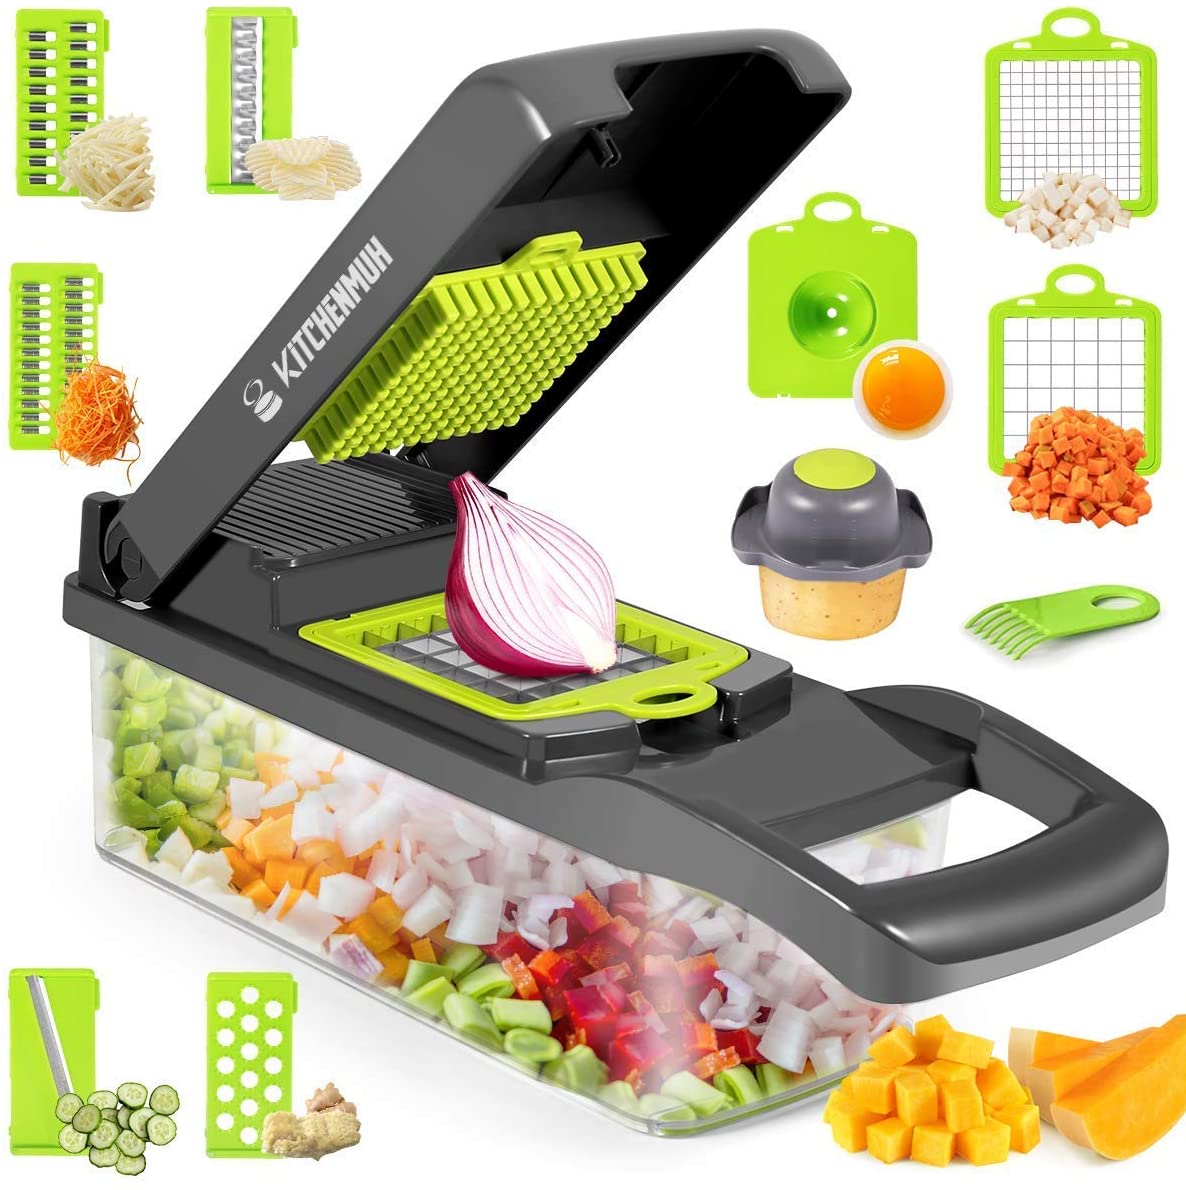 Kitchenmuh Vegetable Chopper, Onion Chopper, All in 1 Vegetable Mandoline Slicer for Kitchen, Pro Slicer Dicer, Slicer Vegetable Cutter for Potato Chip/French Fry/Cheese(Grey+Green)